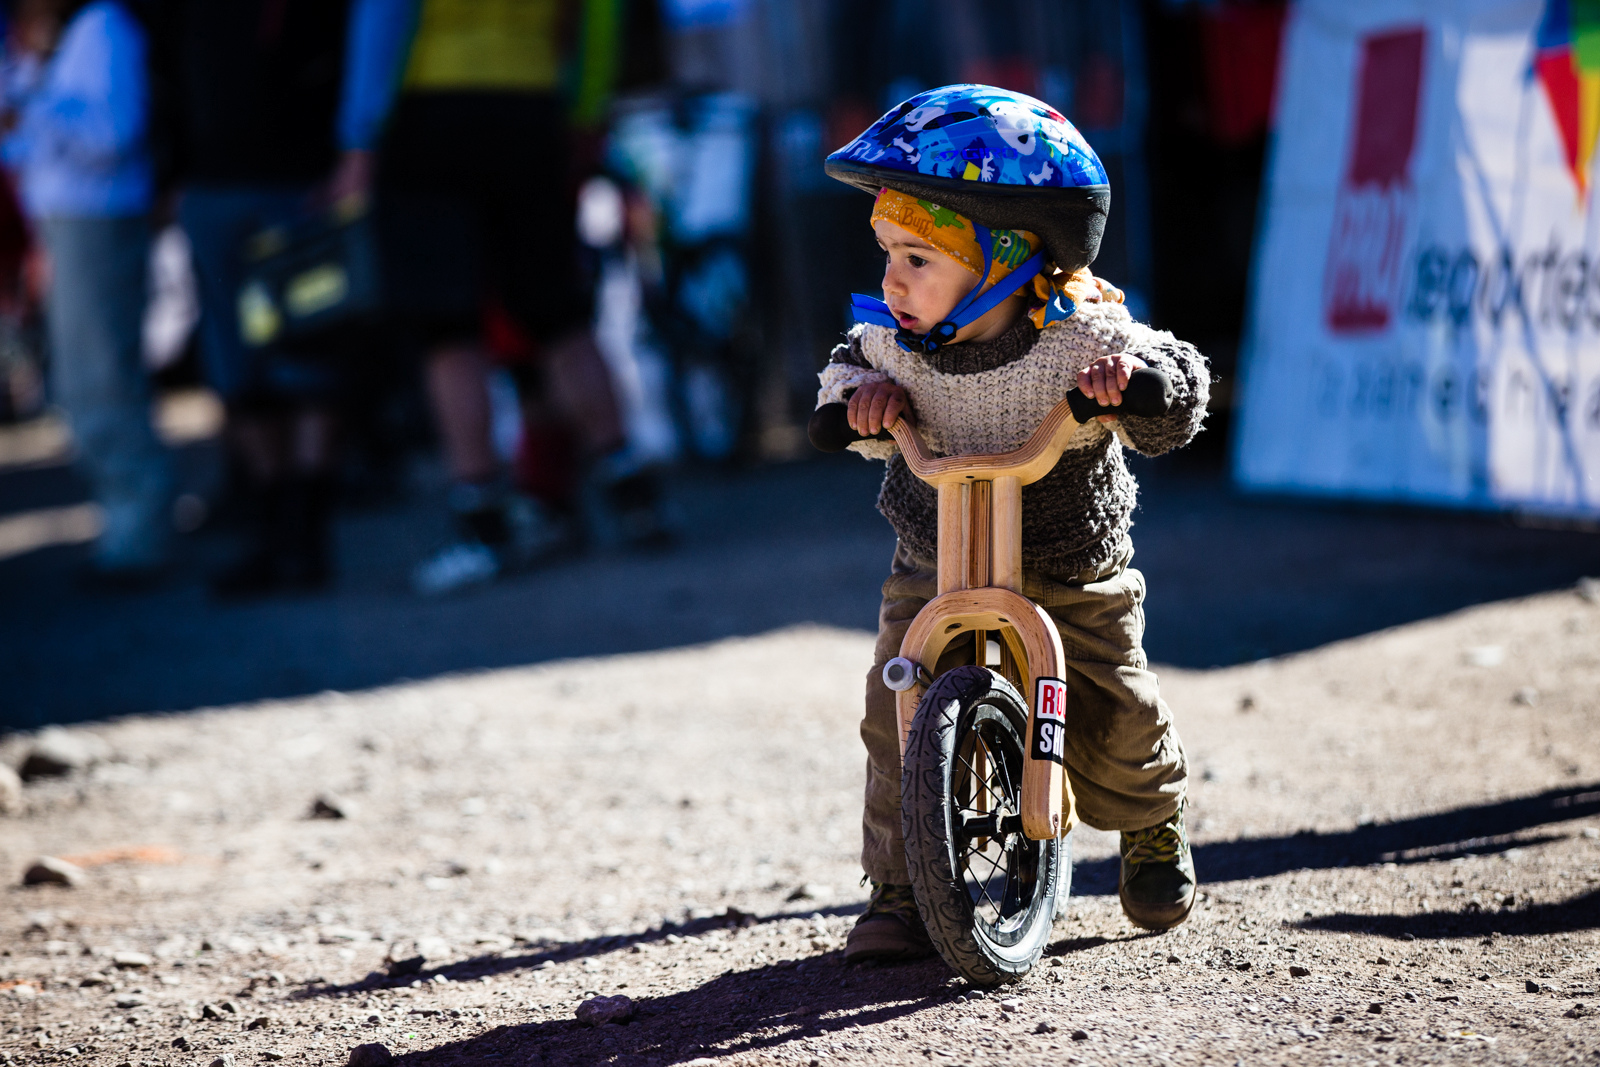 The future of Chilean enduro racing was warming up in the pits - we're not sure he'll be ready for the 60kmp/h straights for a couple of years though.